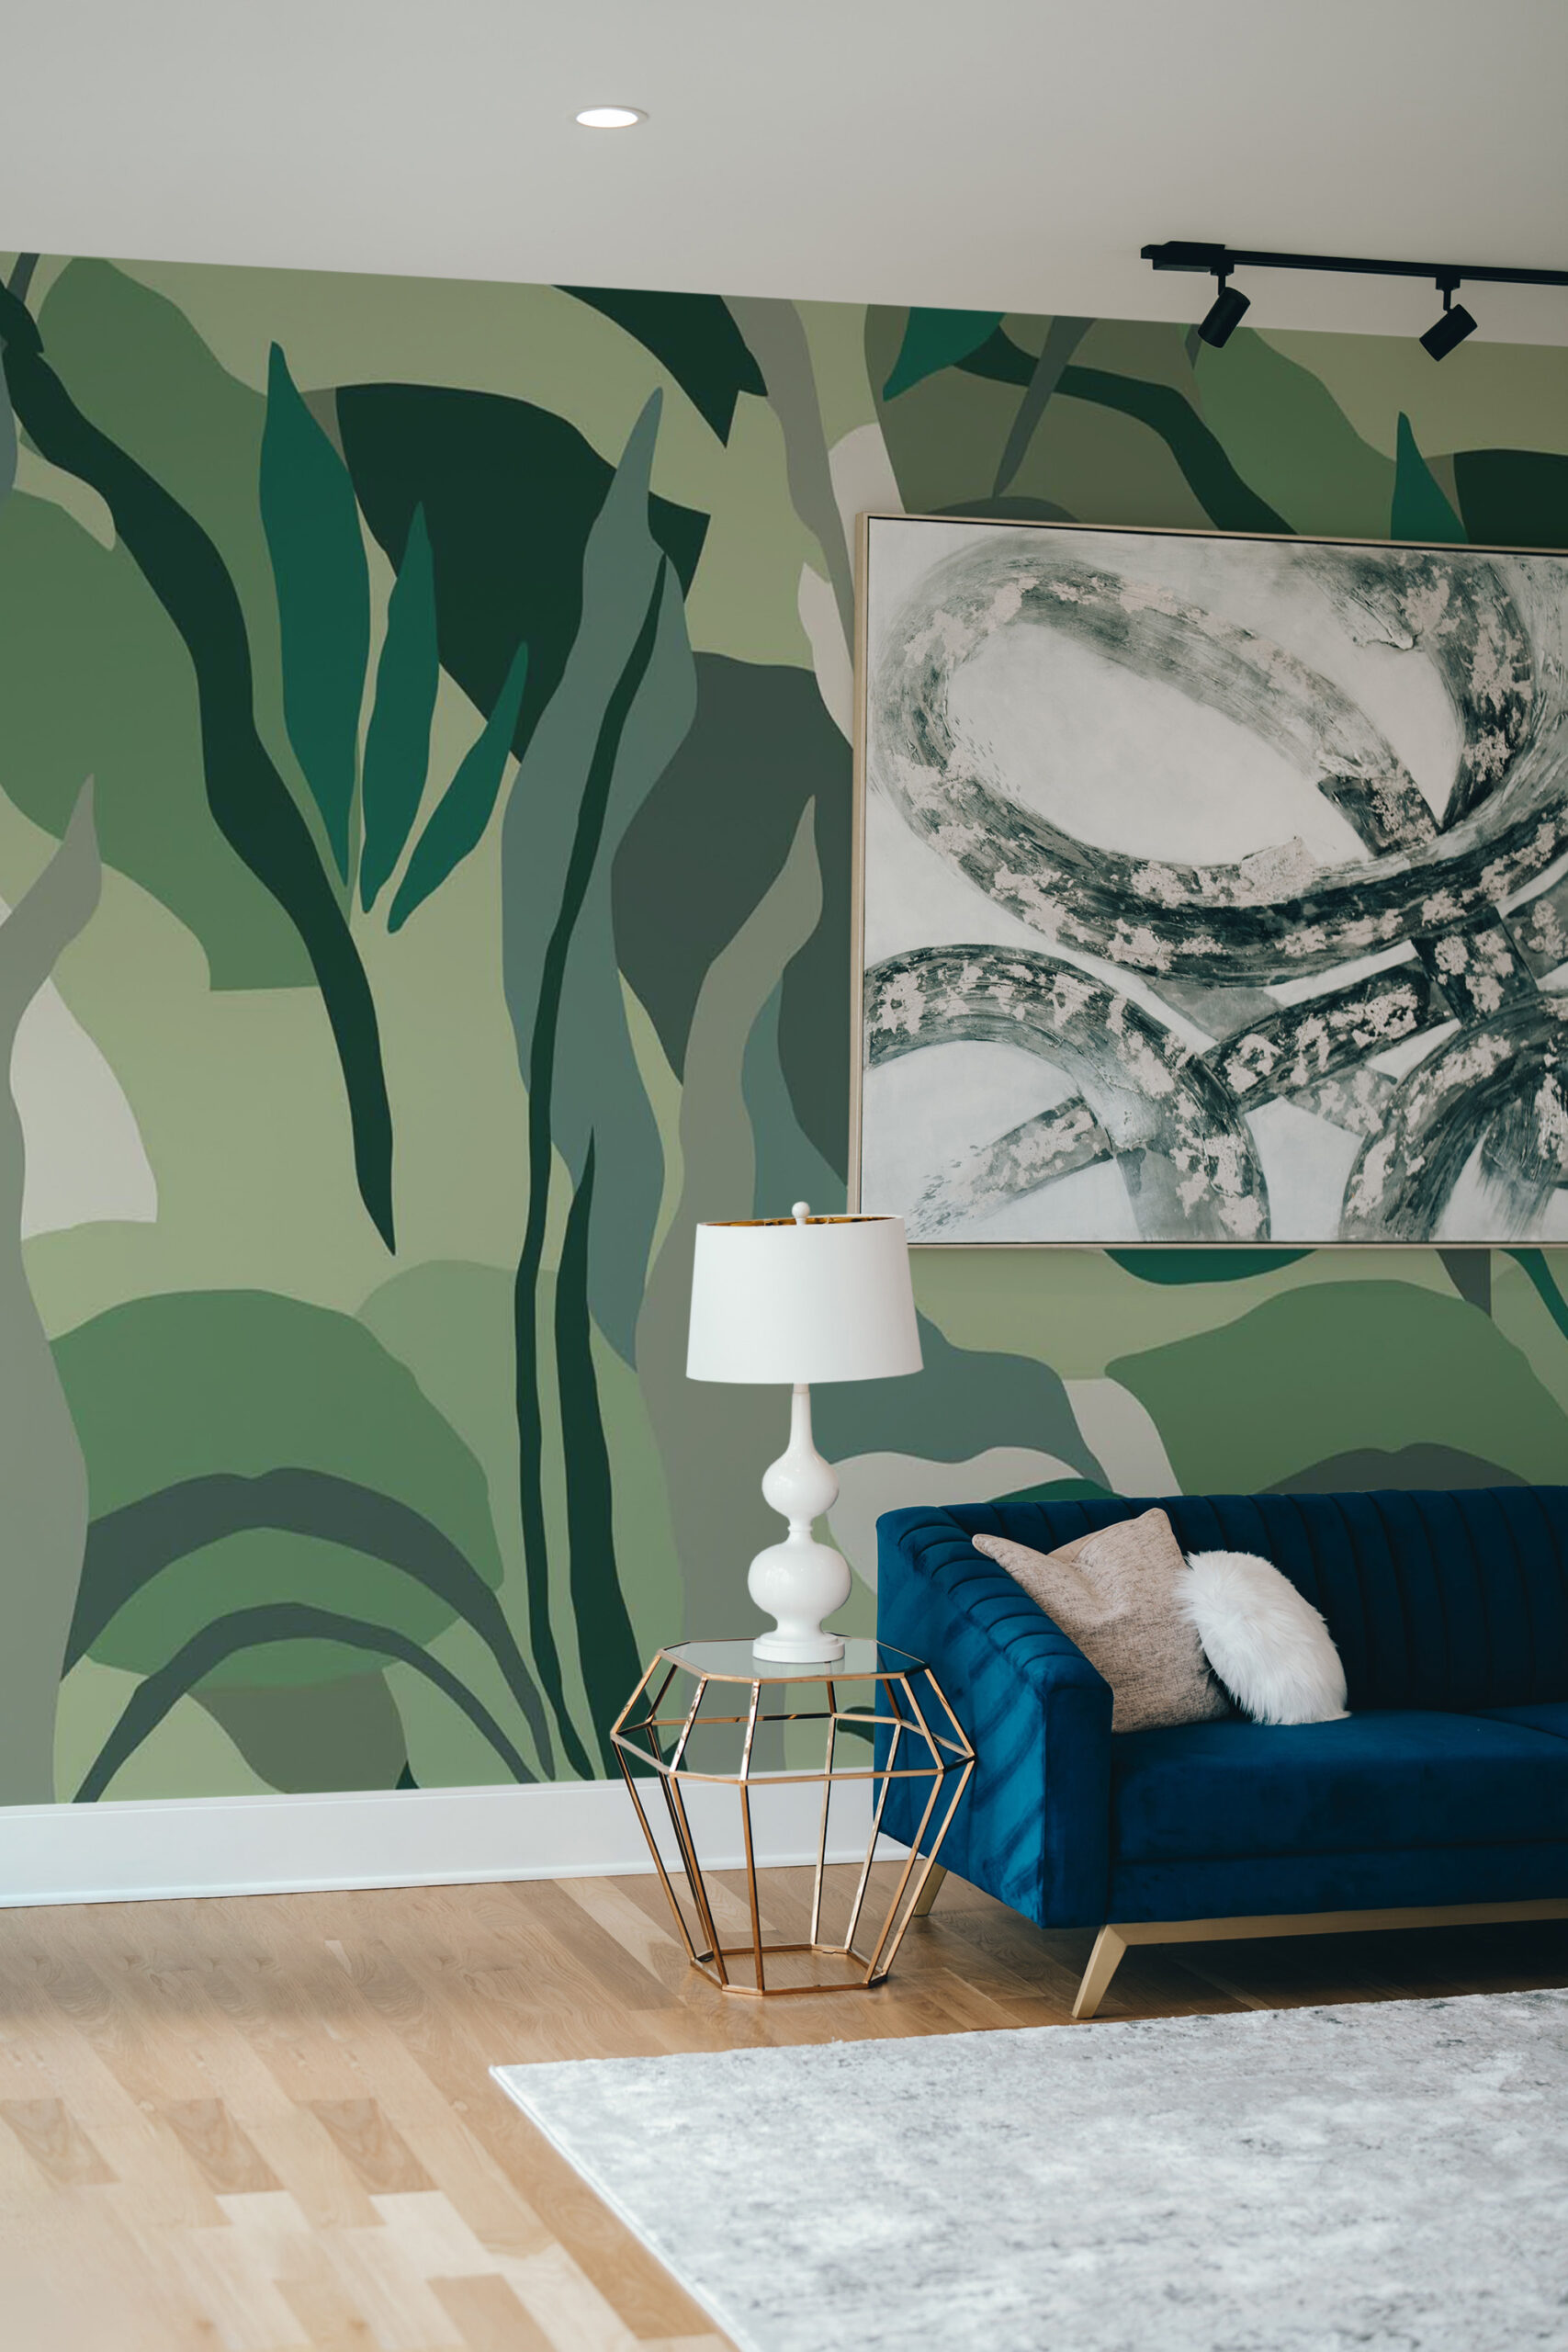 Wall mural peel and stick Green Leaf design by Fancy Walls